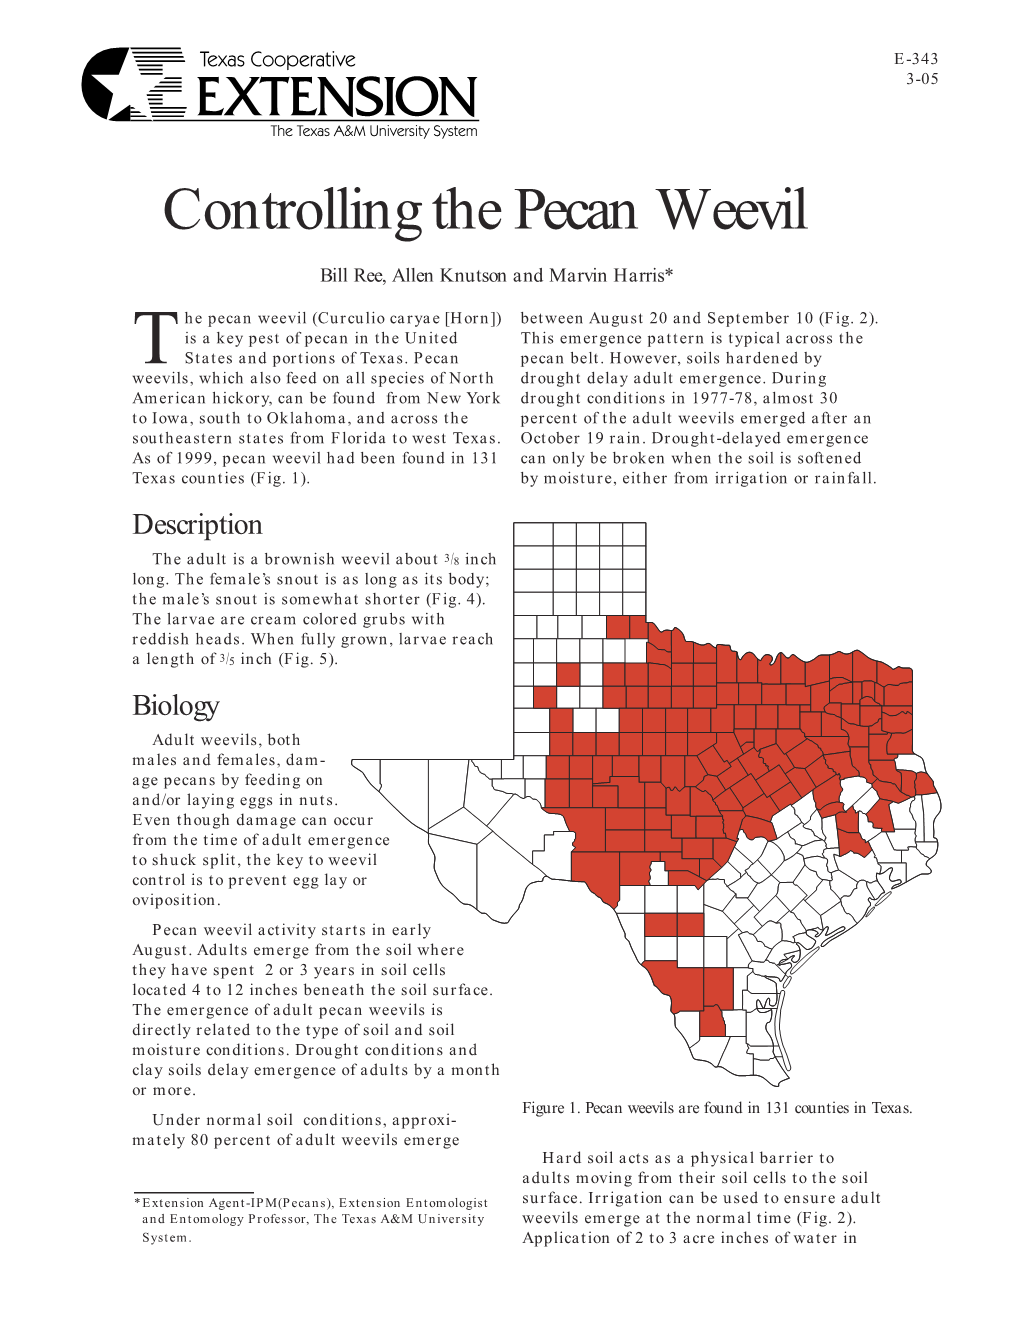 Controlling the Pecan Weevil